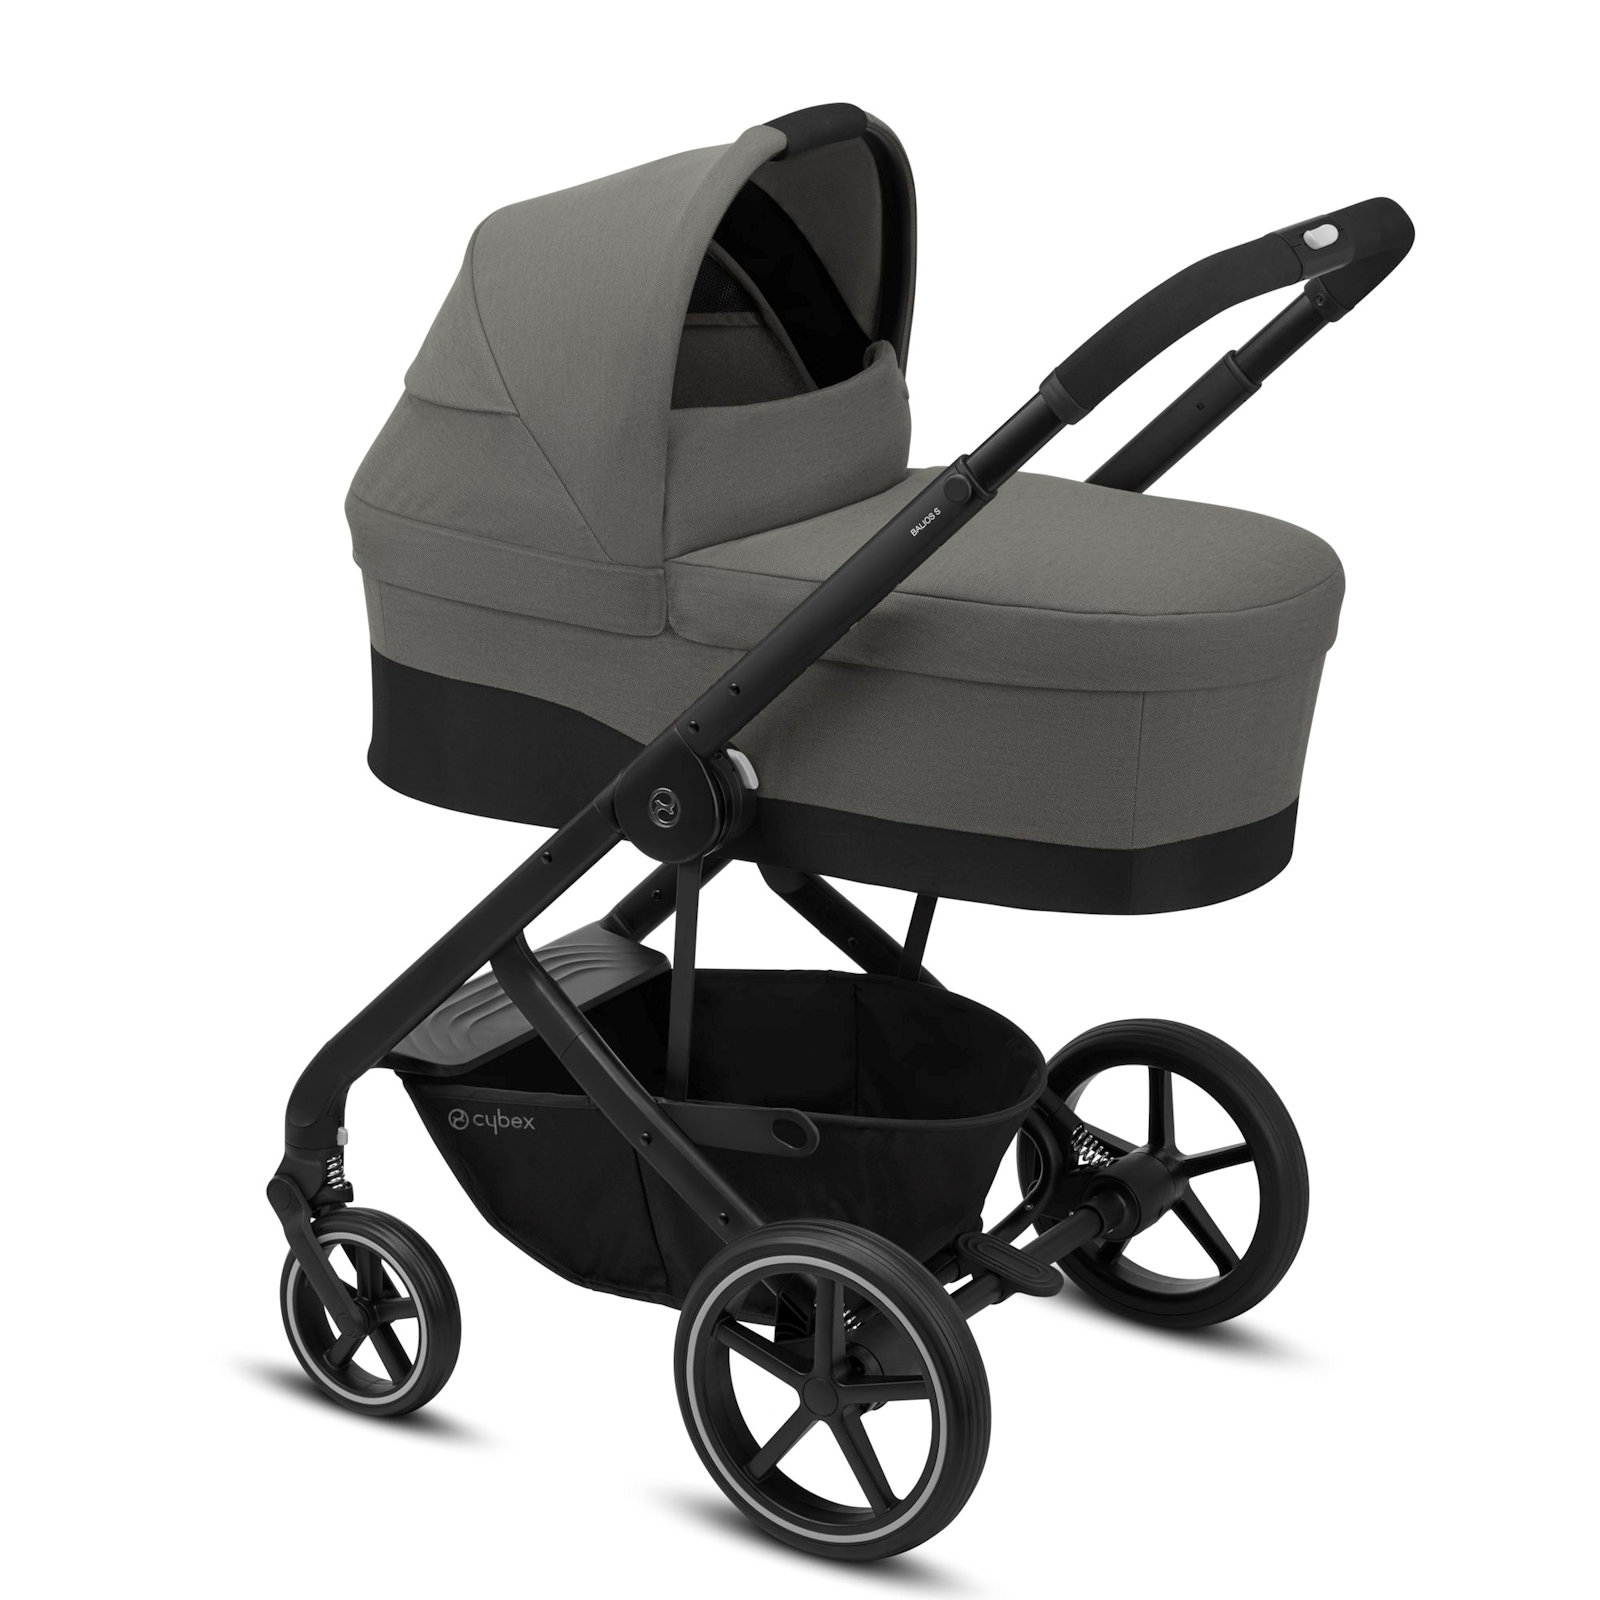 Cybex-Cot-S-Carrycot-Chassis-Soho-Grey